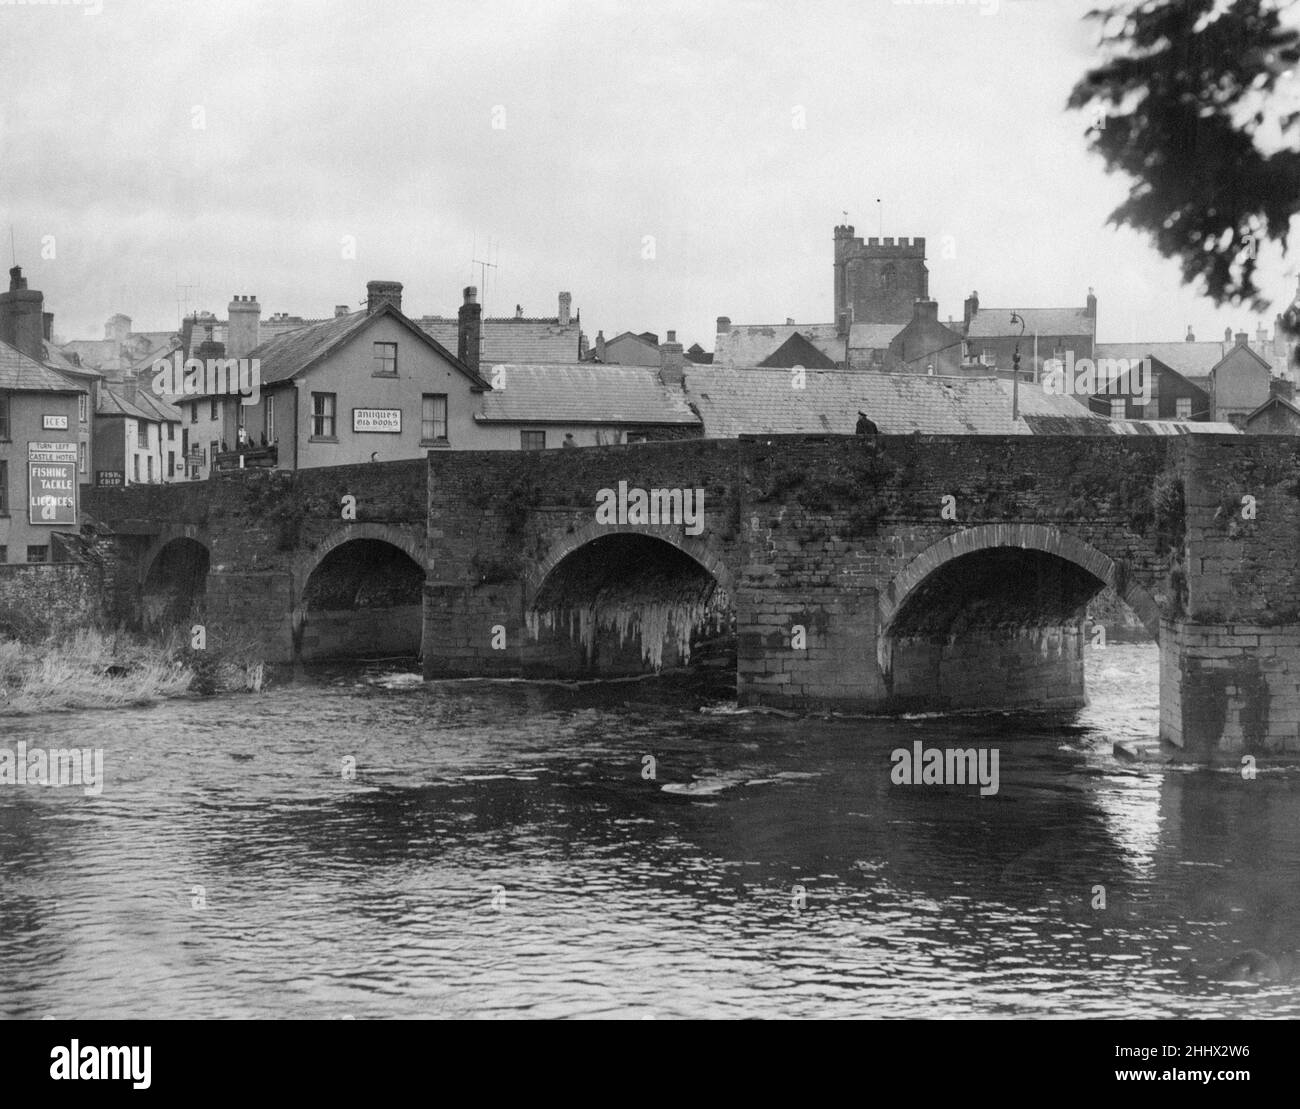 Llanfaes Bridge, standing over The River Usk in Brecon, a market town and community in Powys, Mid Wales, 24th February 1954. Stock Photo